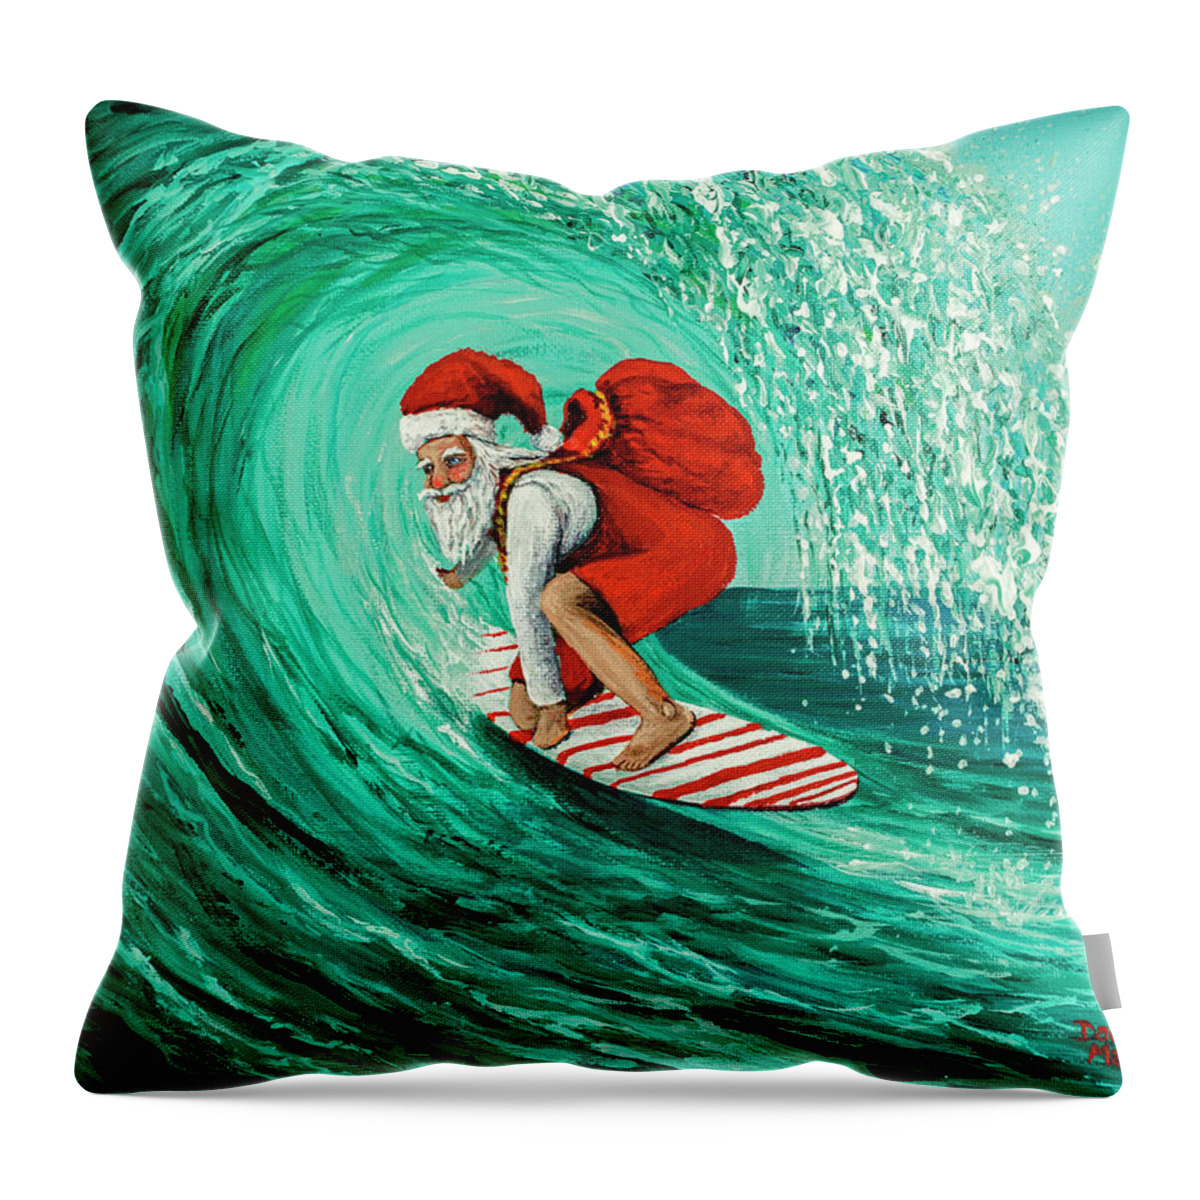 Christmas Throw Pillow featuring the painting Surfing Santa by Darice Machel McGuire